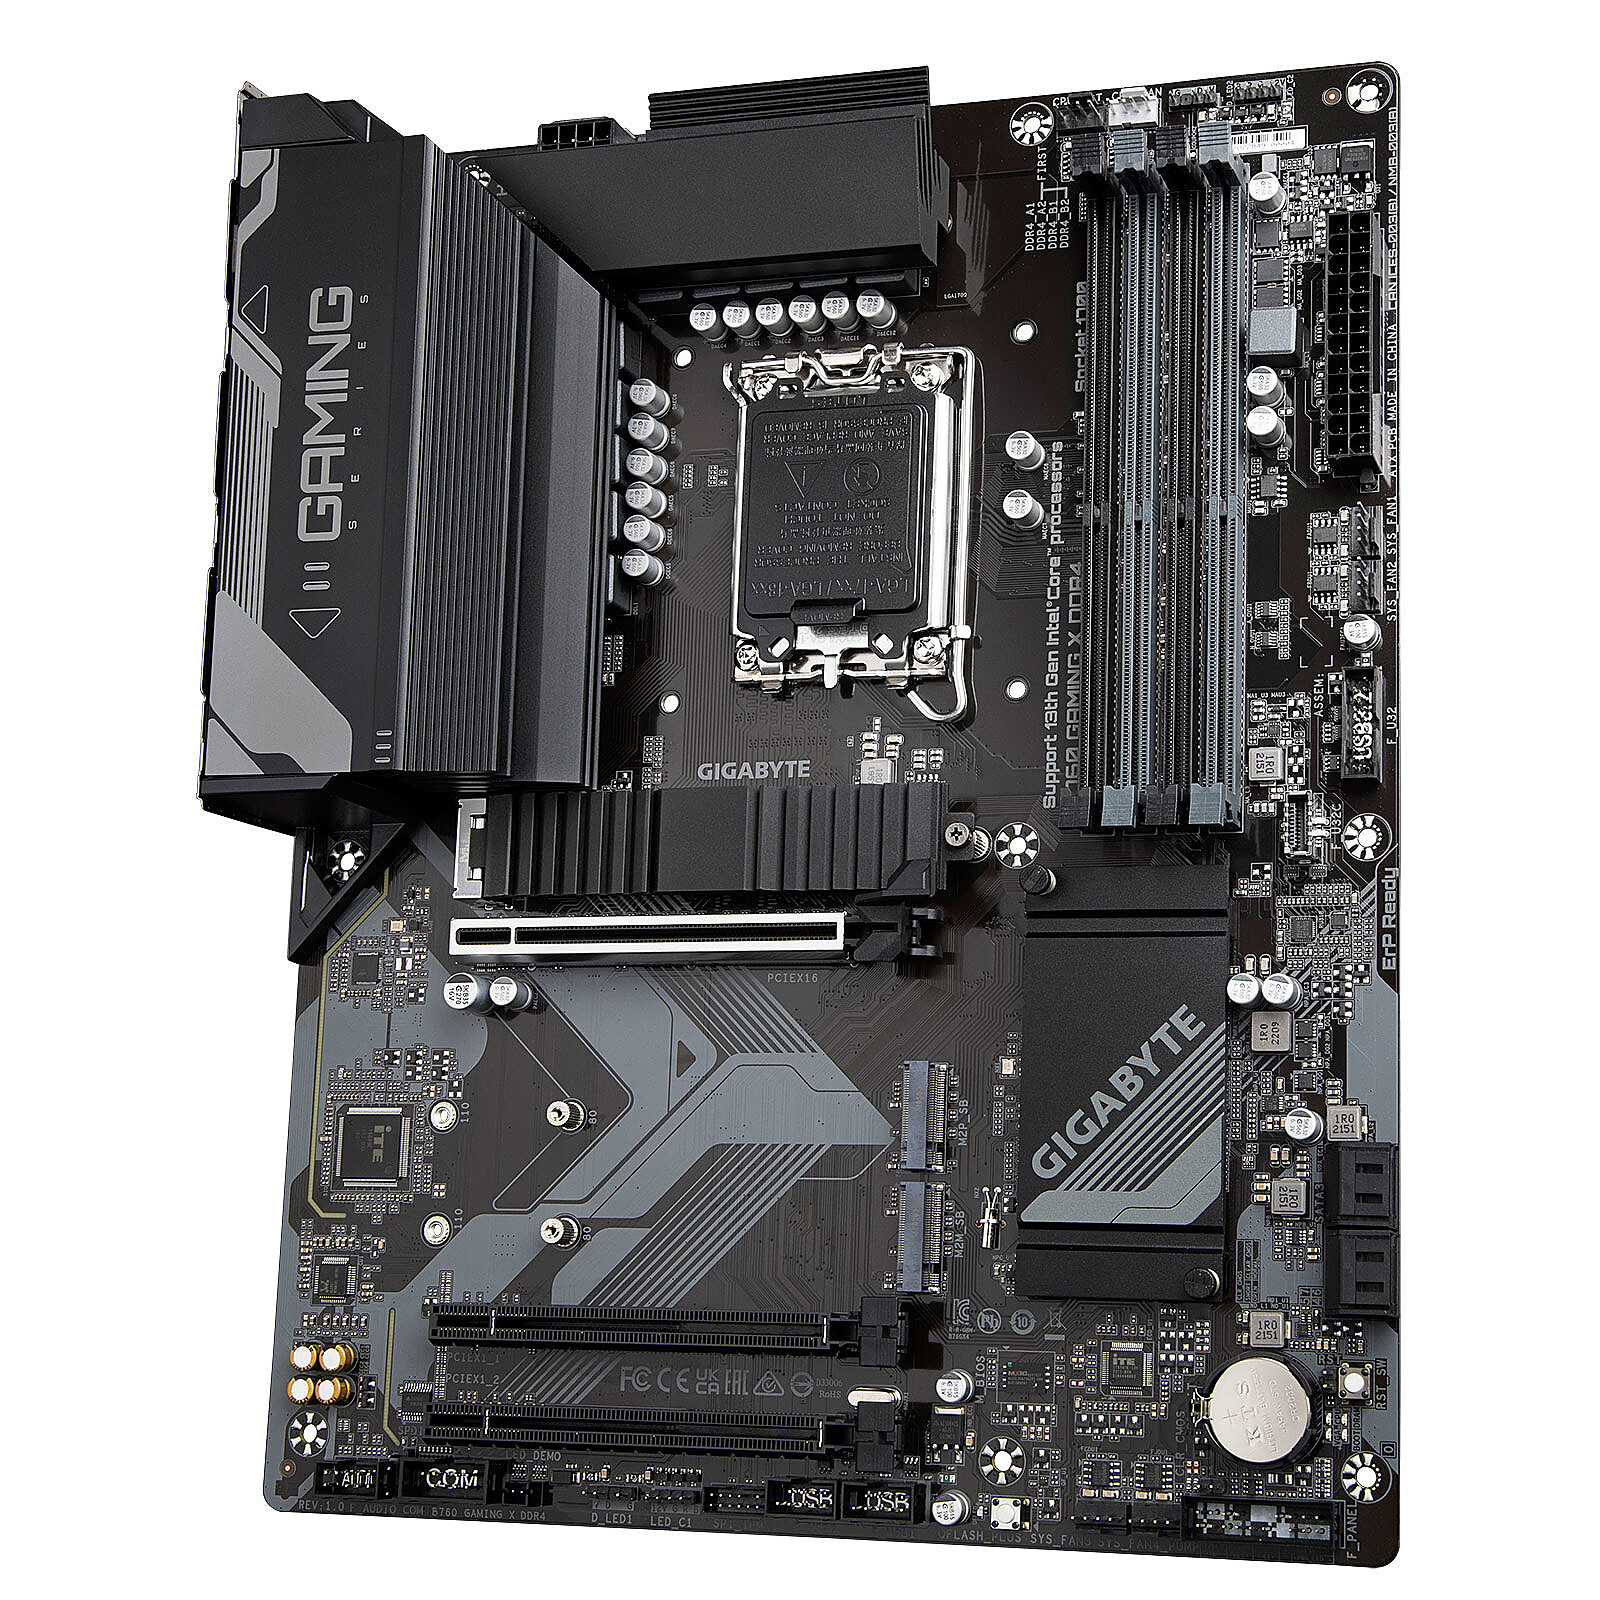 Kit Upgrade Pc I7 pas cher - Achat neuf et occasion